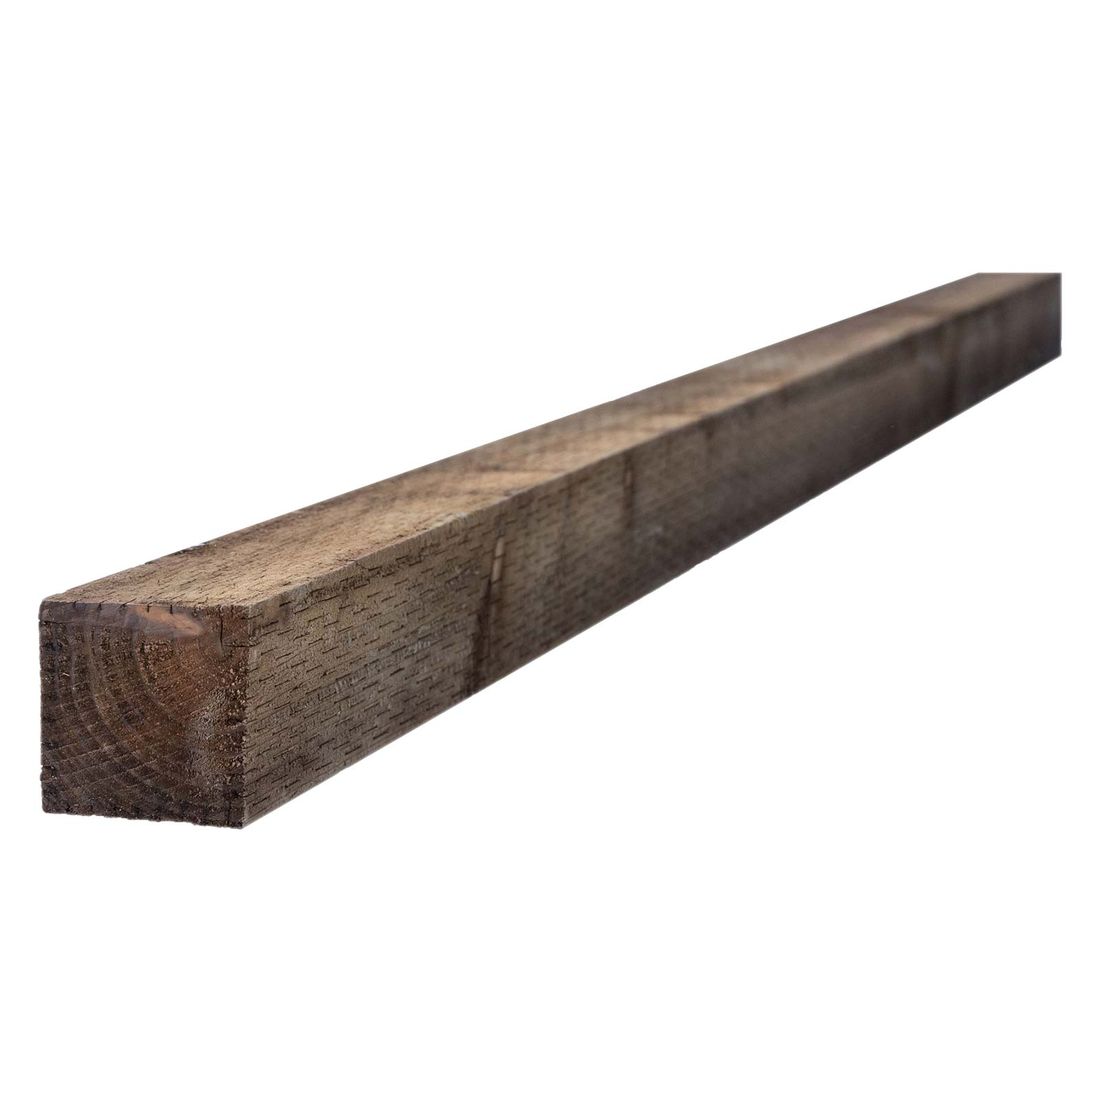 Incised Fence Post Treated Brown 100 X 100 4 X 4 3.0M Fsc